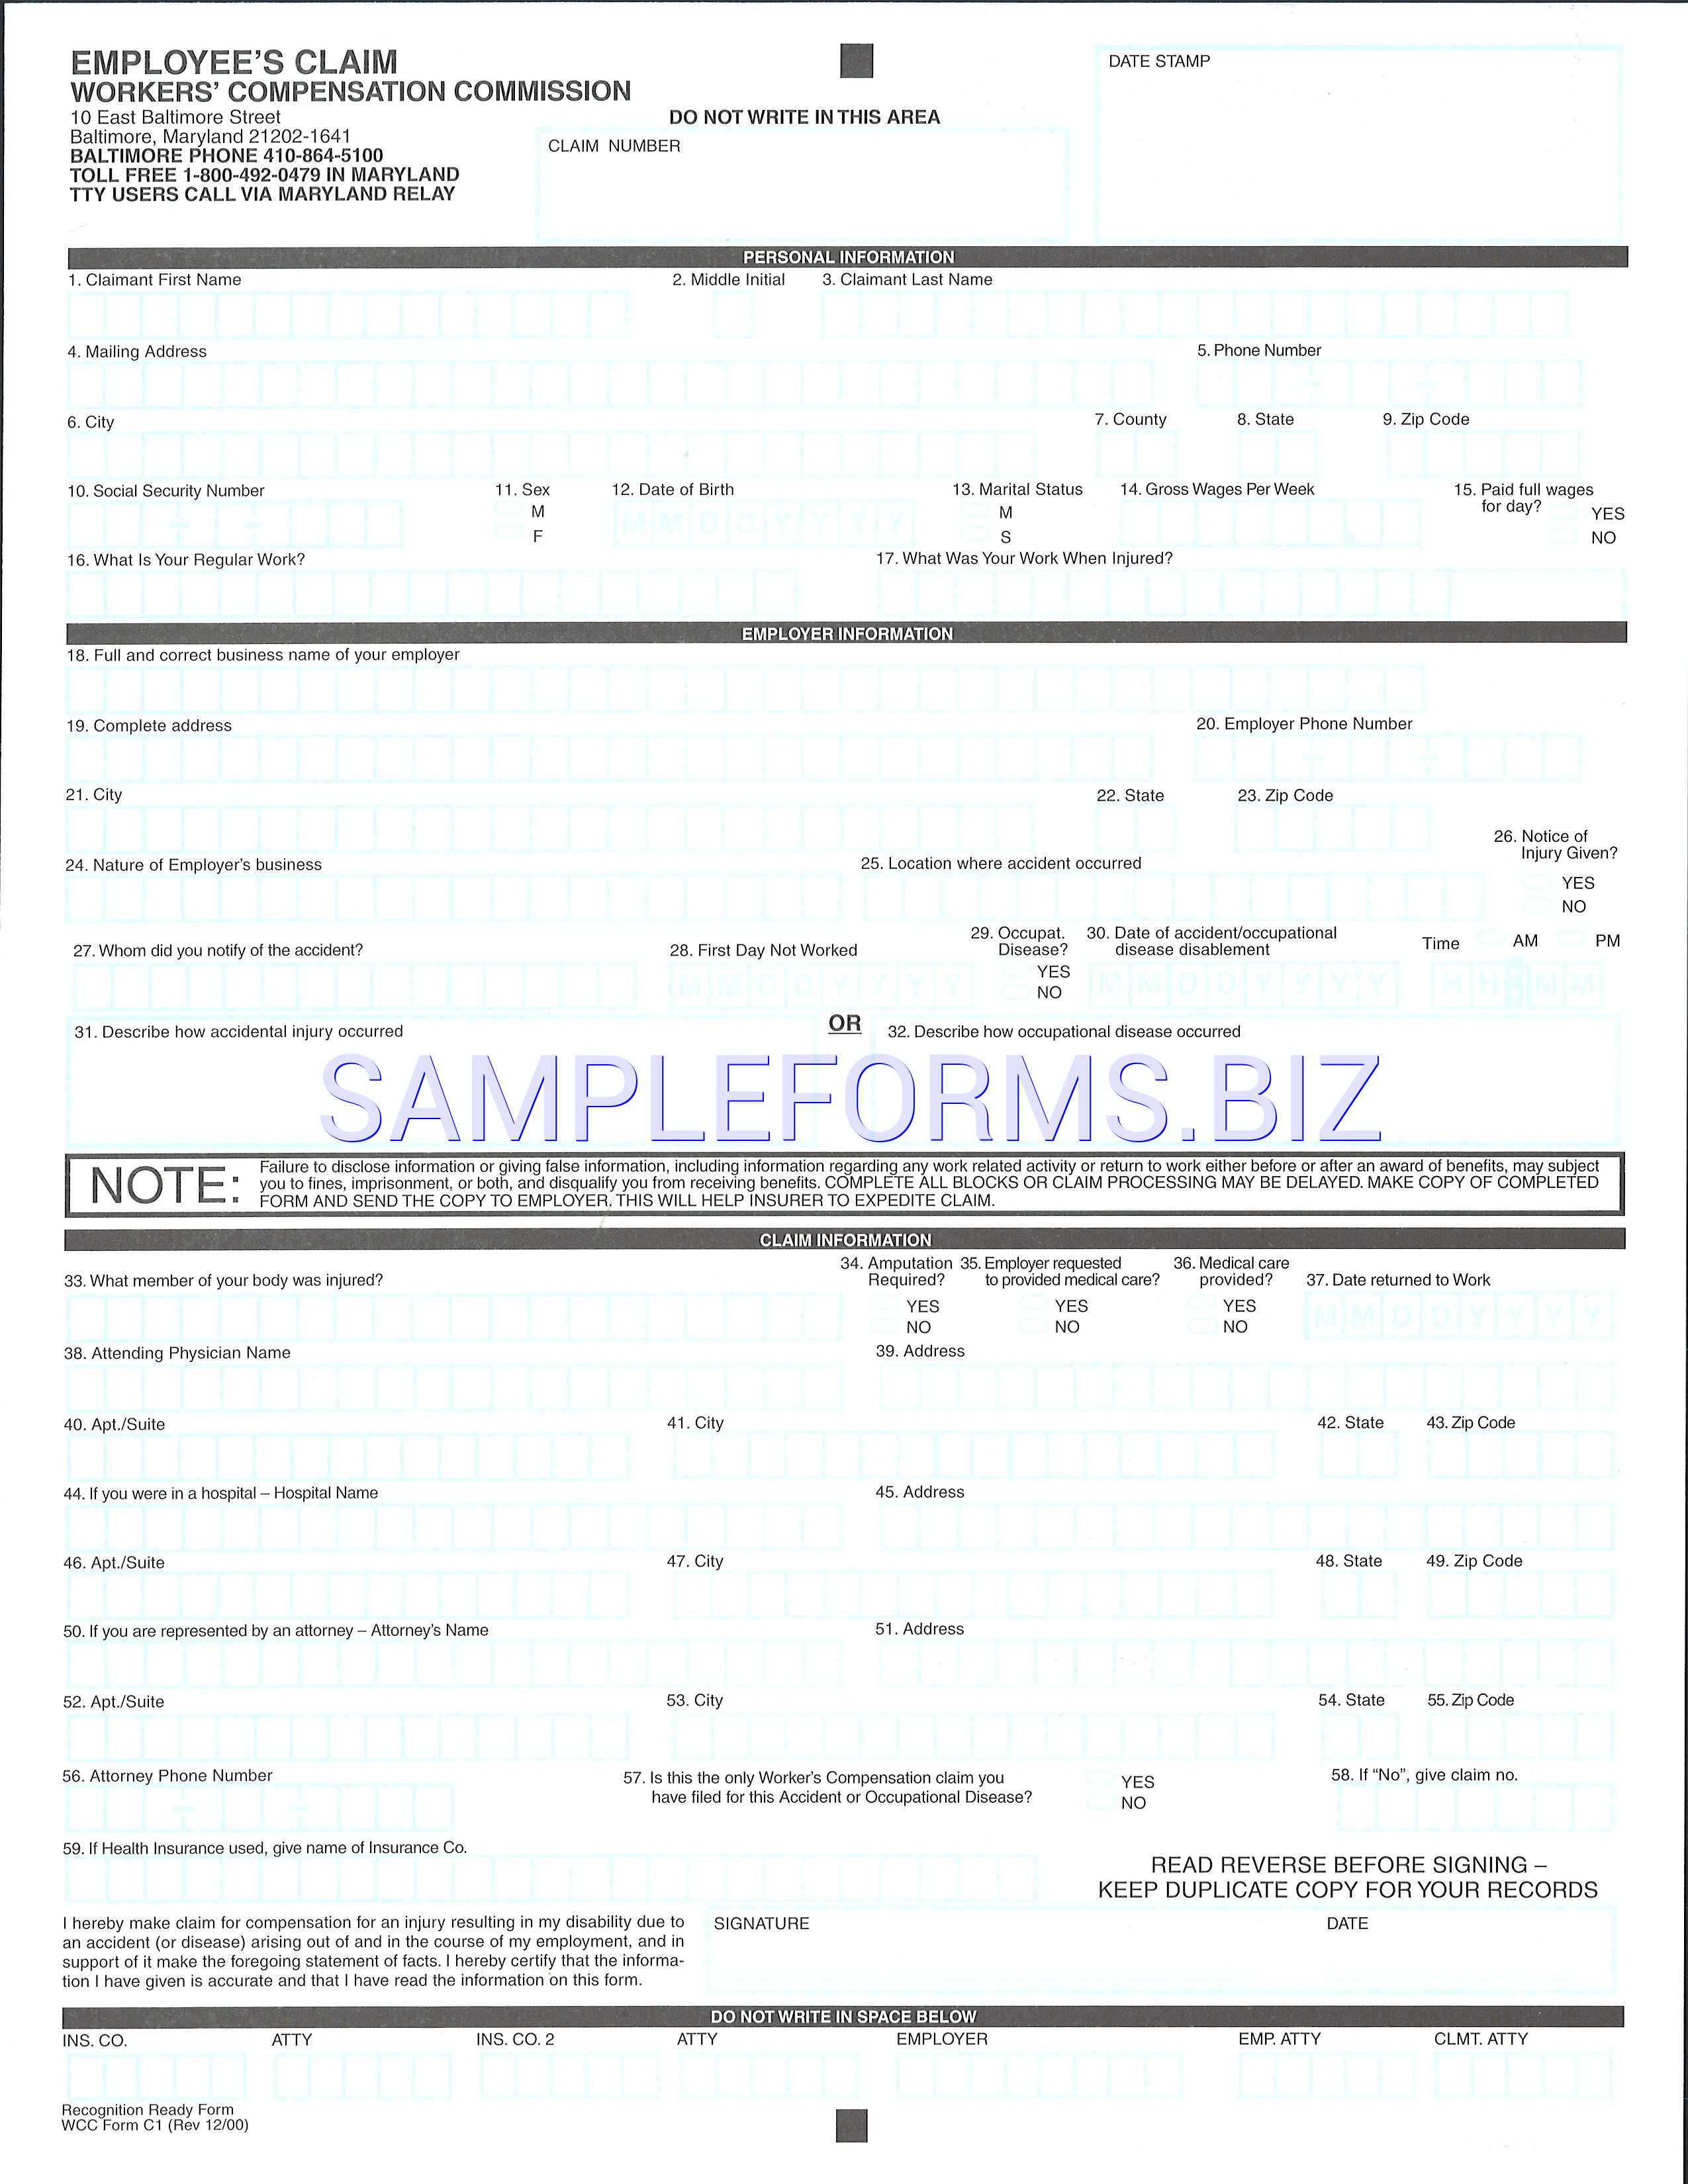 Preview free downloadable Maryland Employee's Claim Form in PDF (page 1)